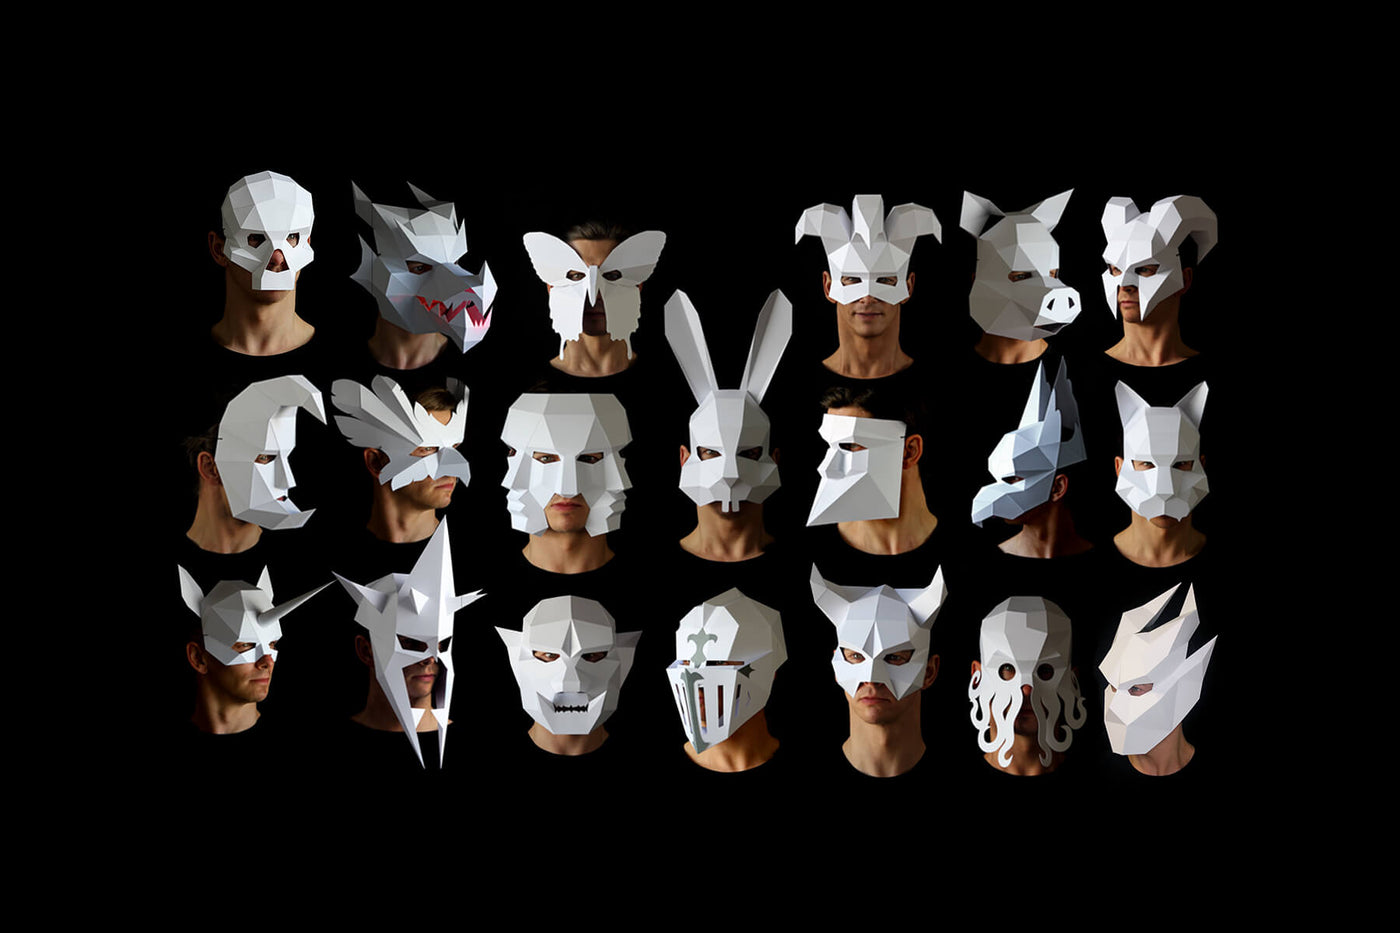 Papercraft Masks Templates to make your own DIY paper face masks. Designed by paper artist Kostas Ntanos, animal masks templates for making low-poly papercraft masks. Download DIY geometric papercraft mask templates for Halloween. 